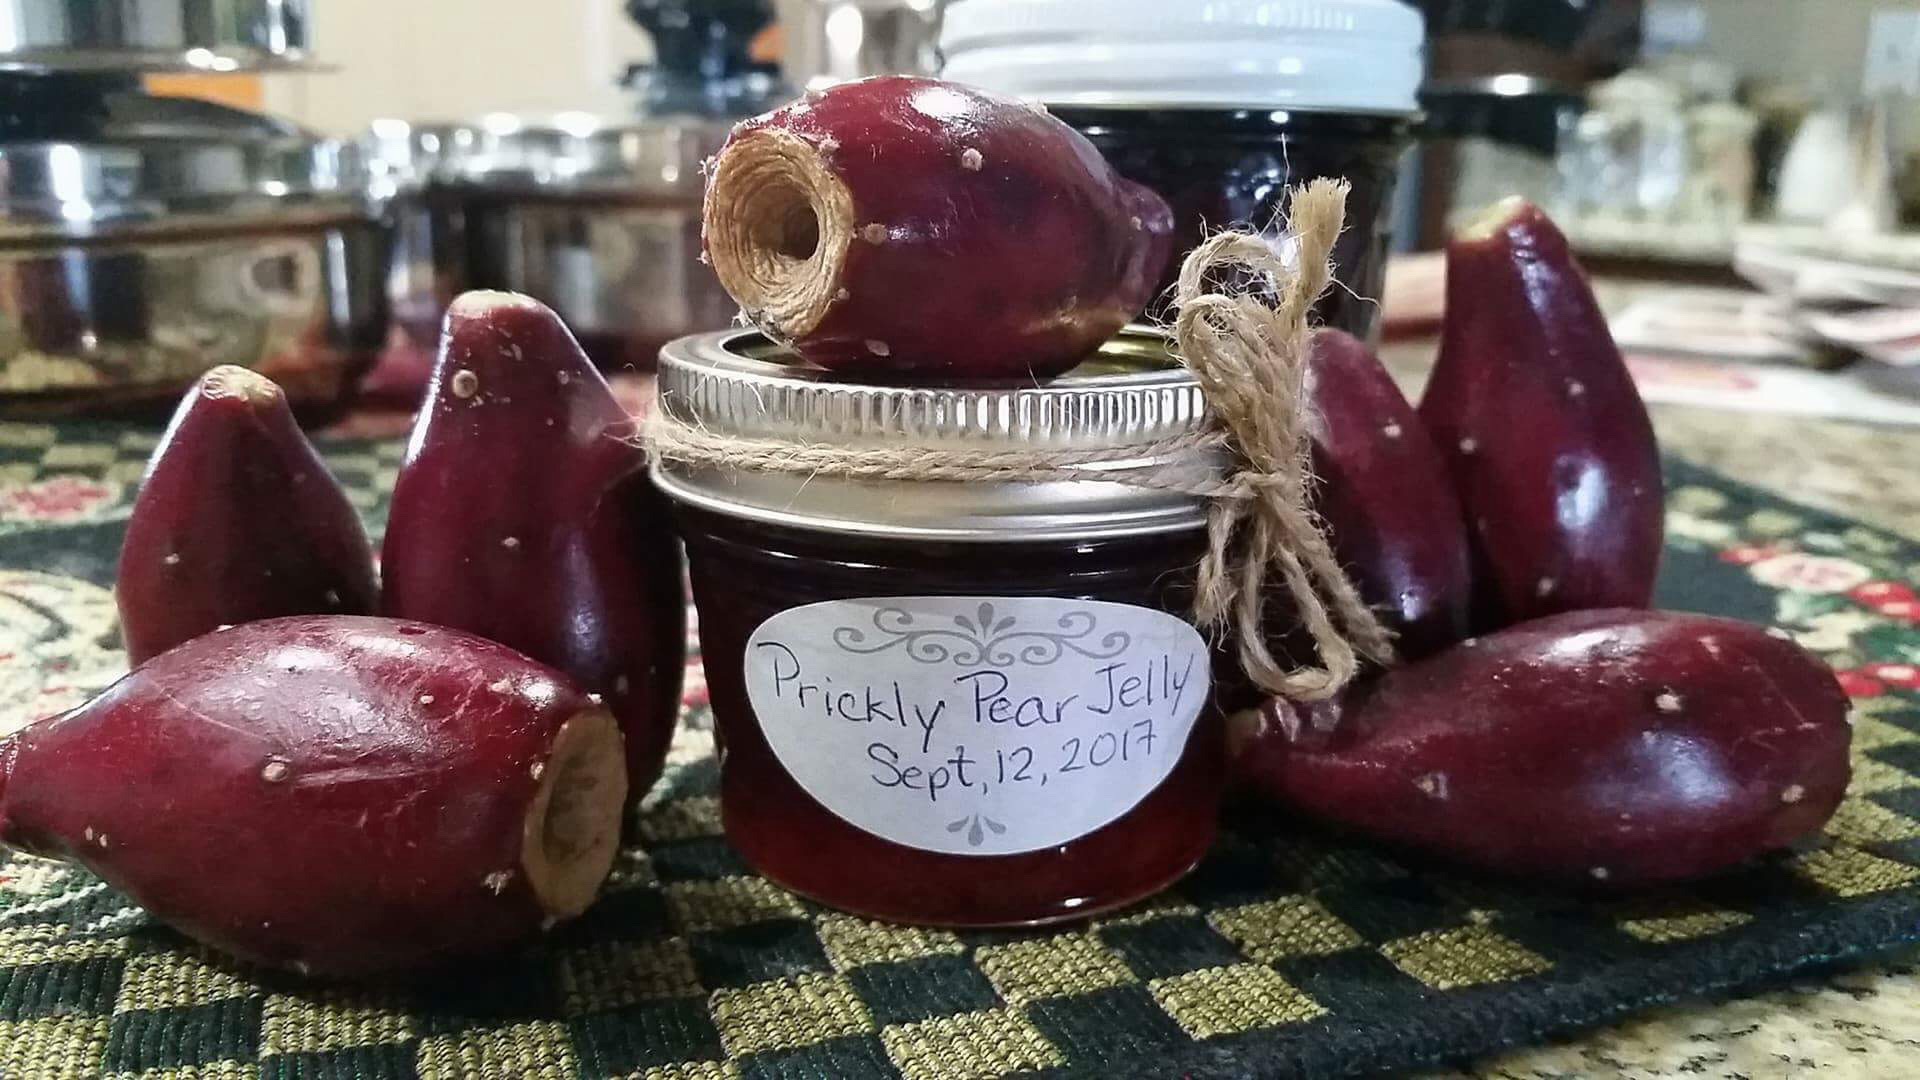 Prickly Pear Jelly 